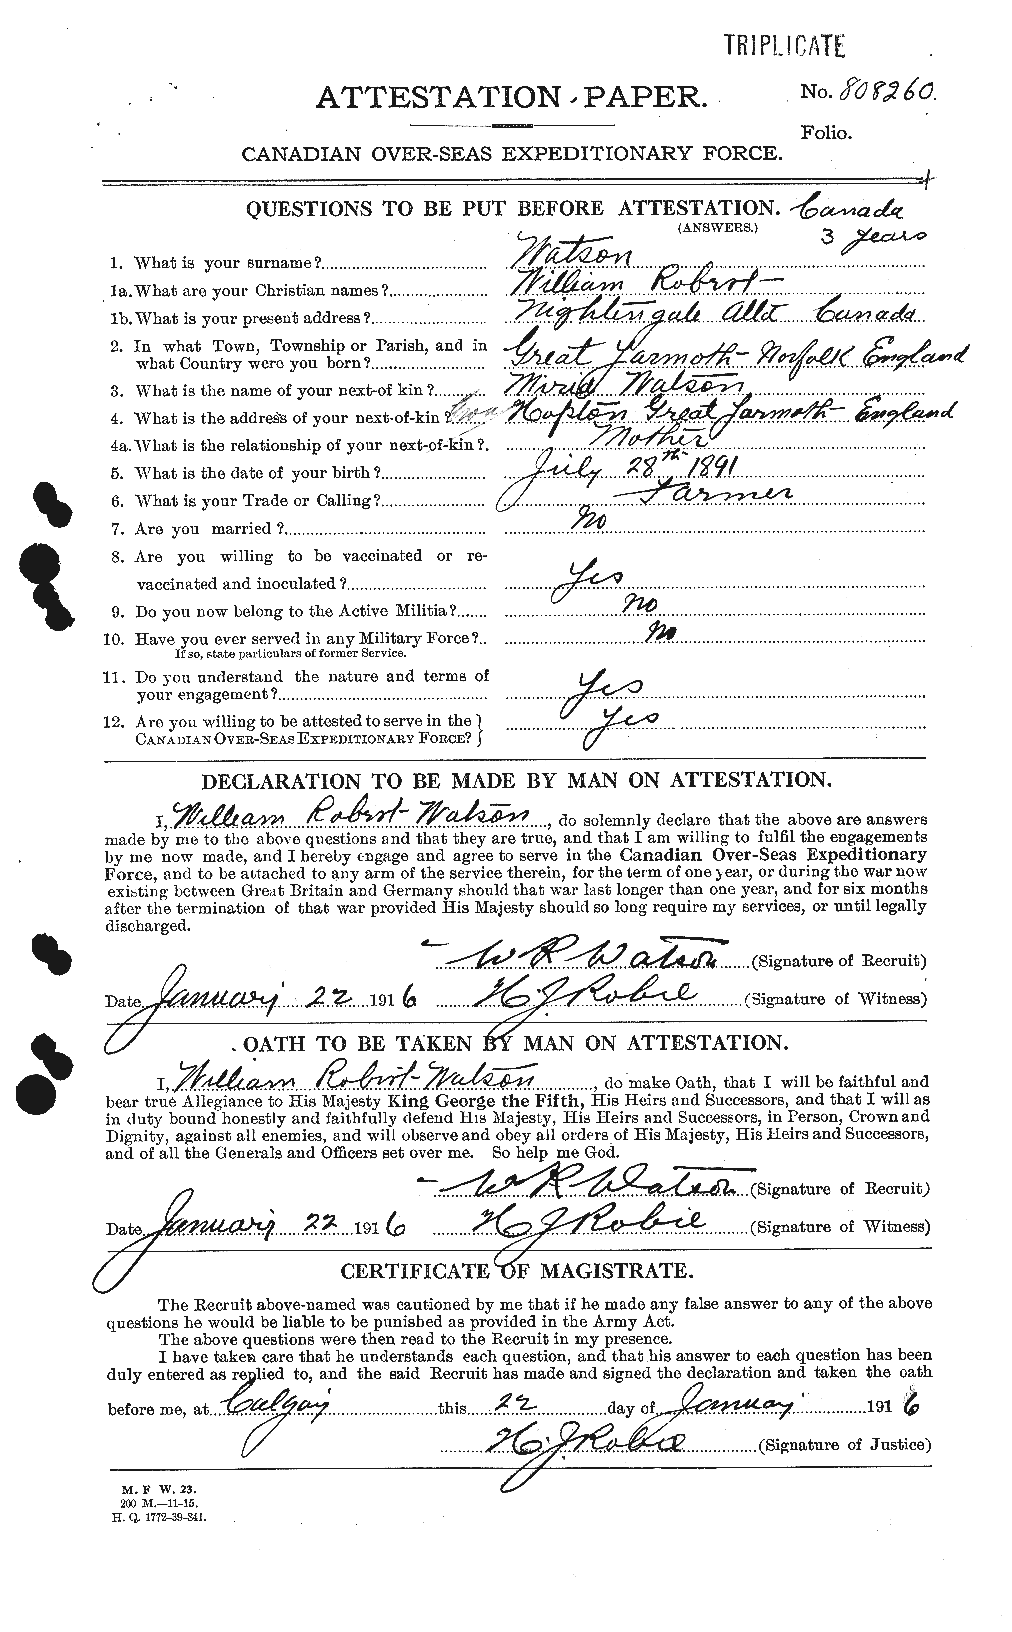 Personnel Records of the First World War - CEF 664343a